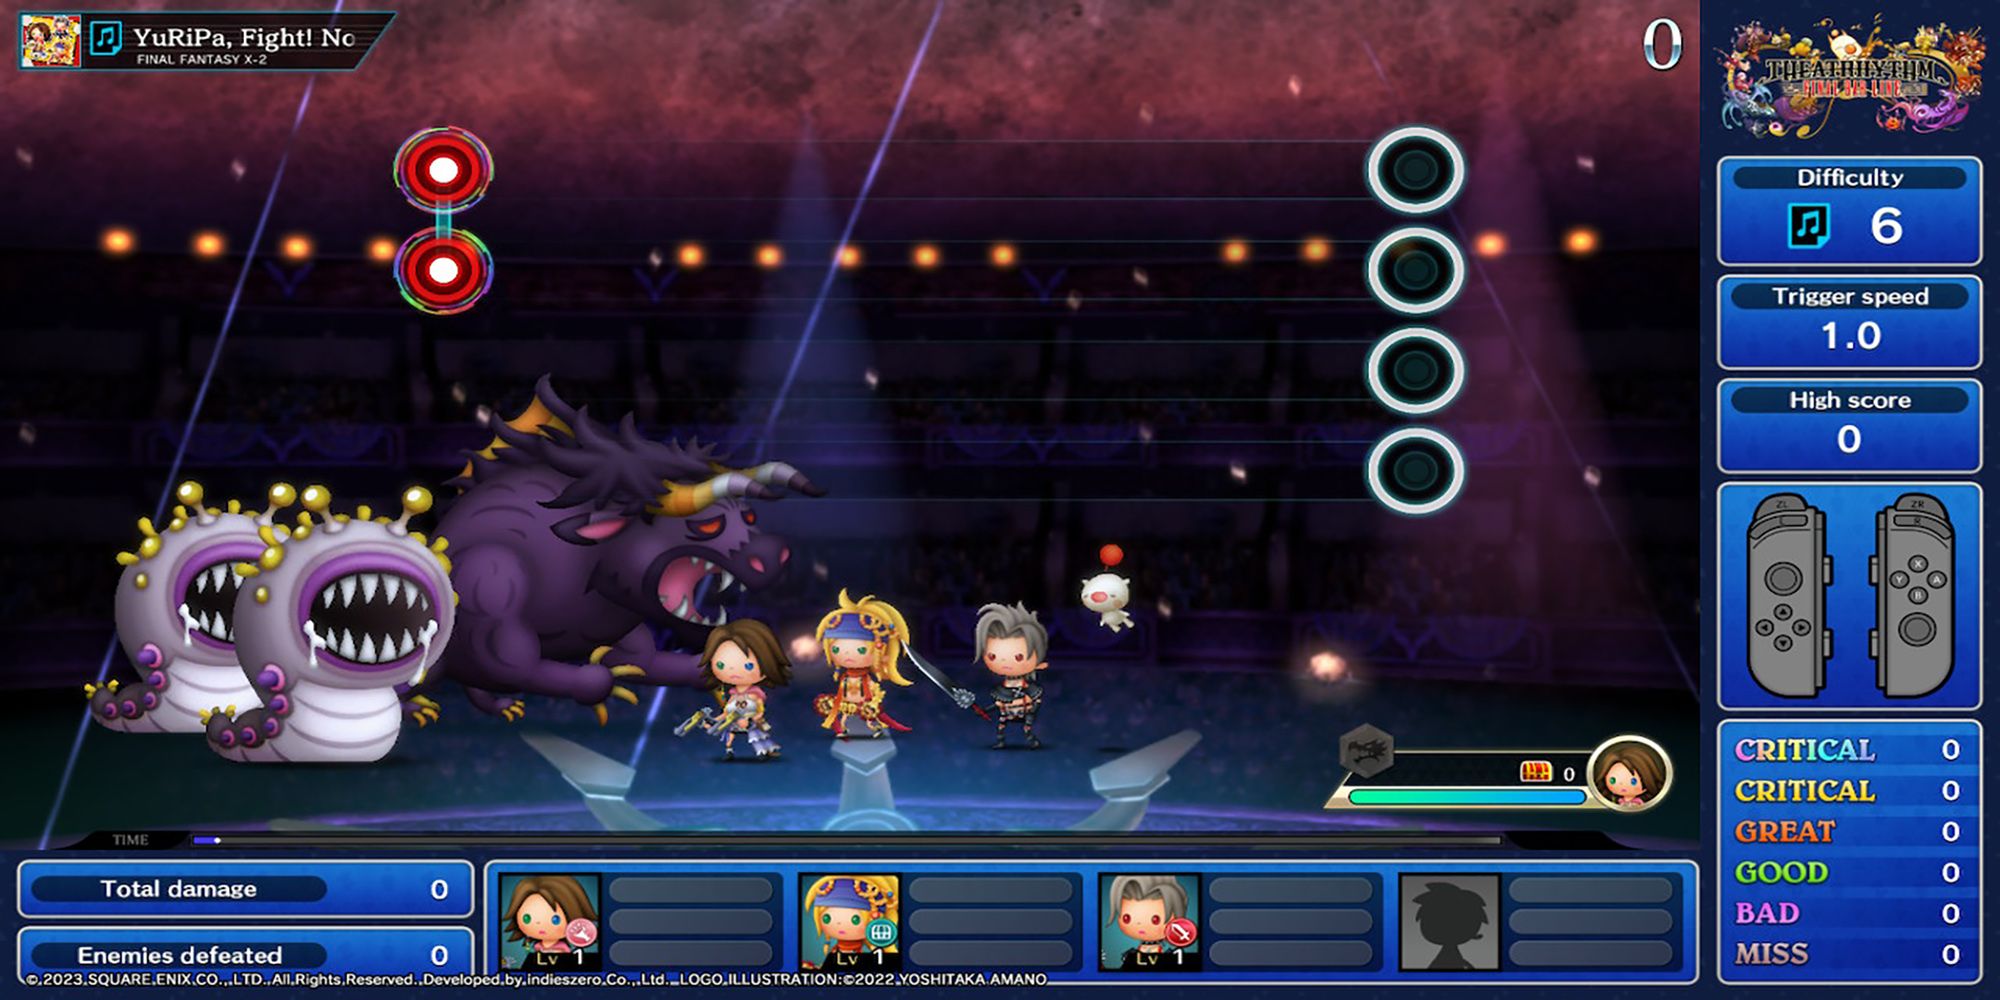 Yuna#2, Rikku, and Paine take down fierce monsters inside a concert arena in Theatrhythm: Final Bar Line.